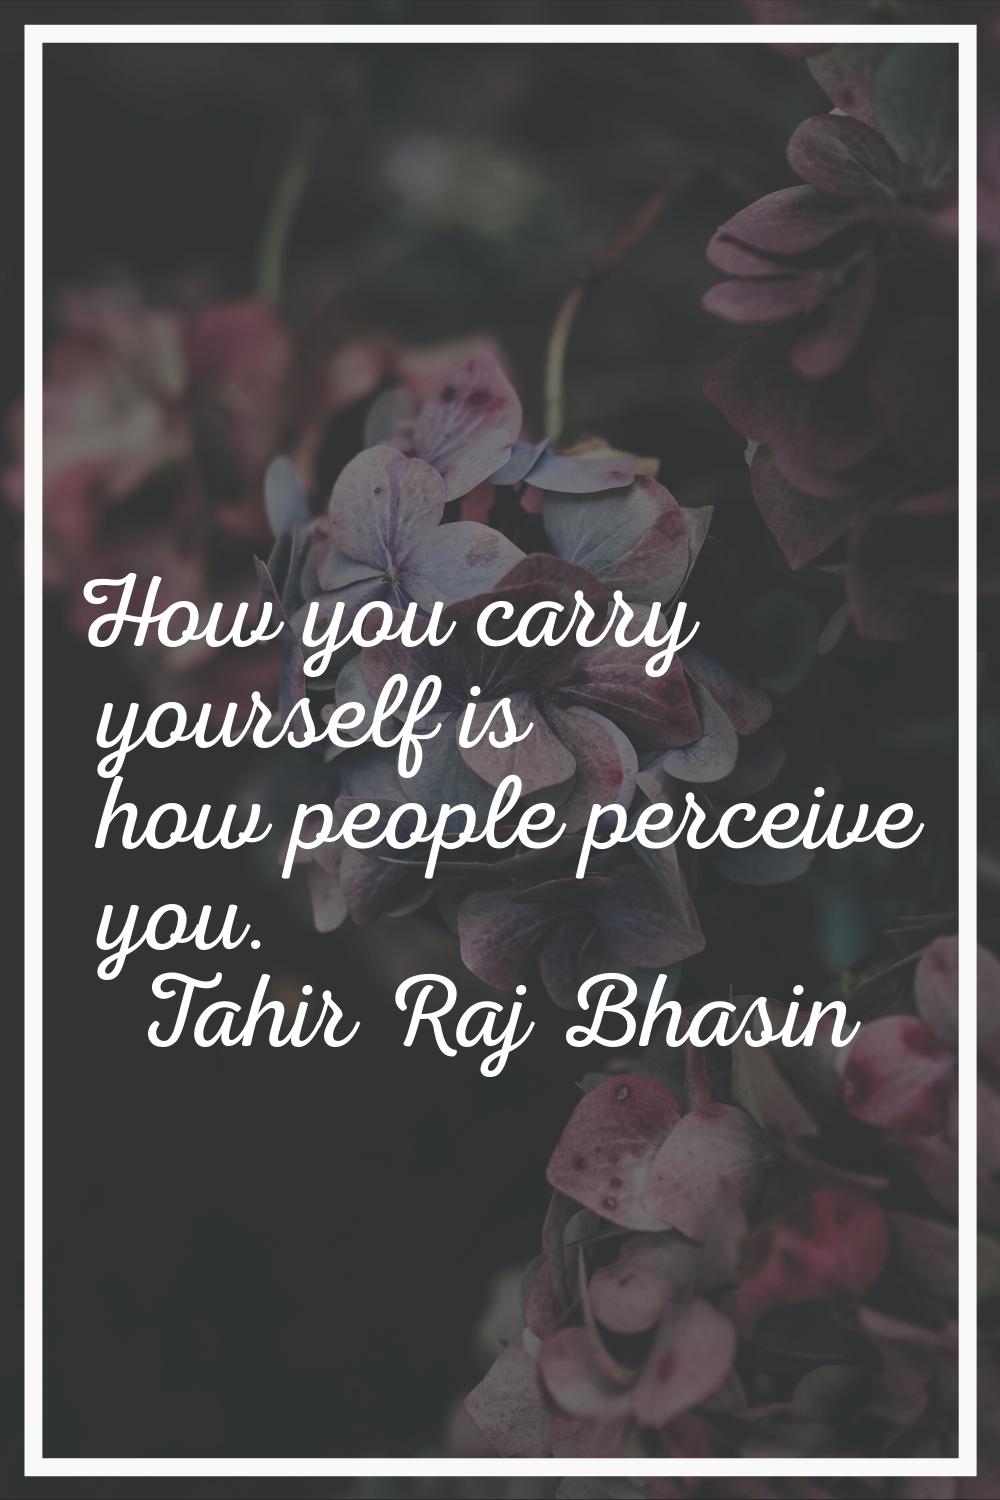 How you carry yourself is how people perceive you.